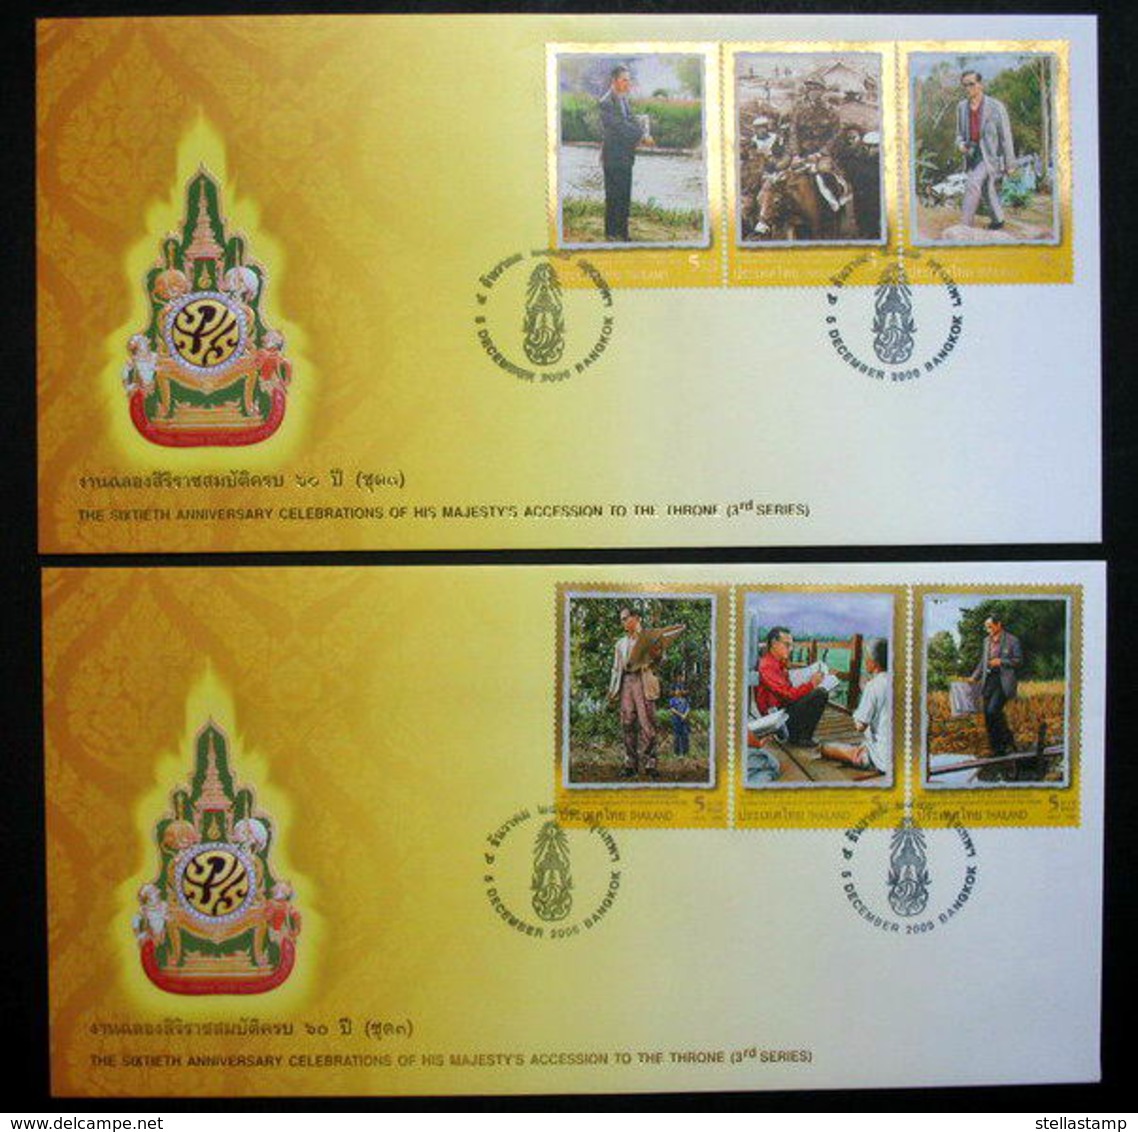 Thailand Stamp FDC 2006 60thHM Accession To The Throne 3rd - Thailand